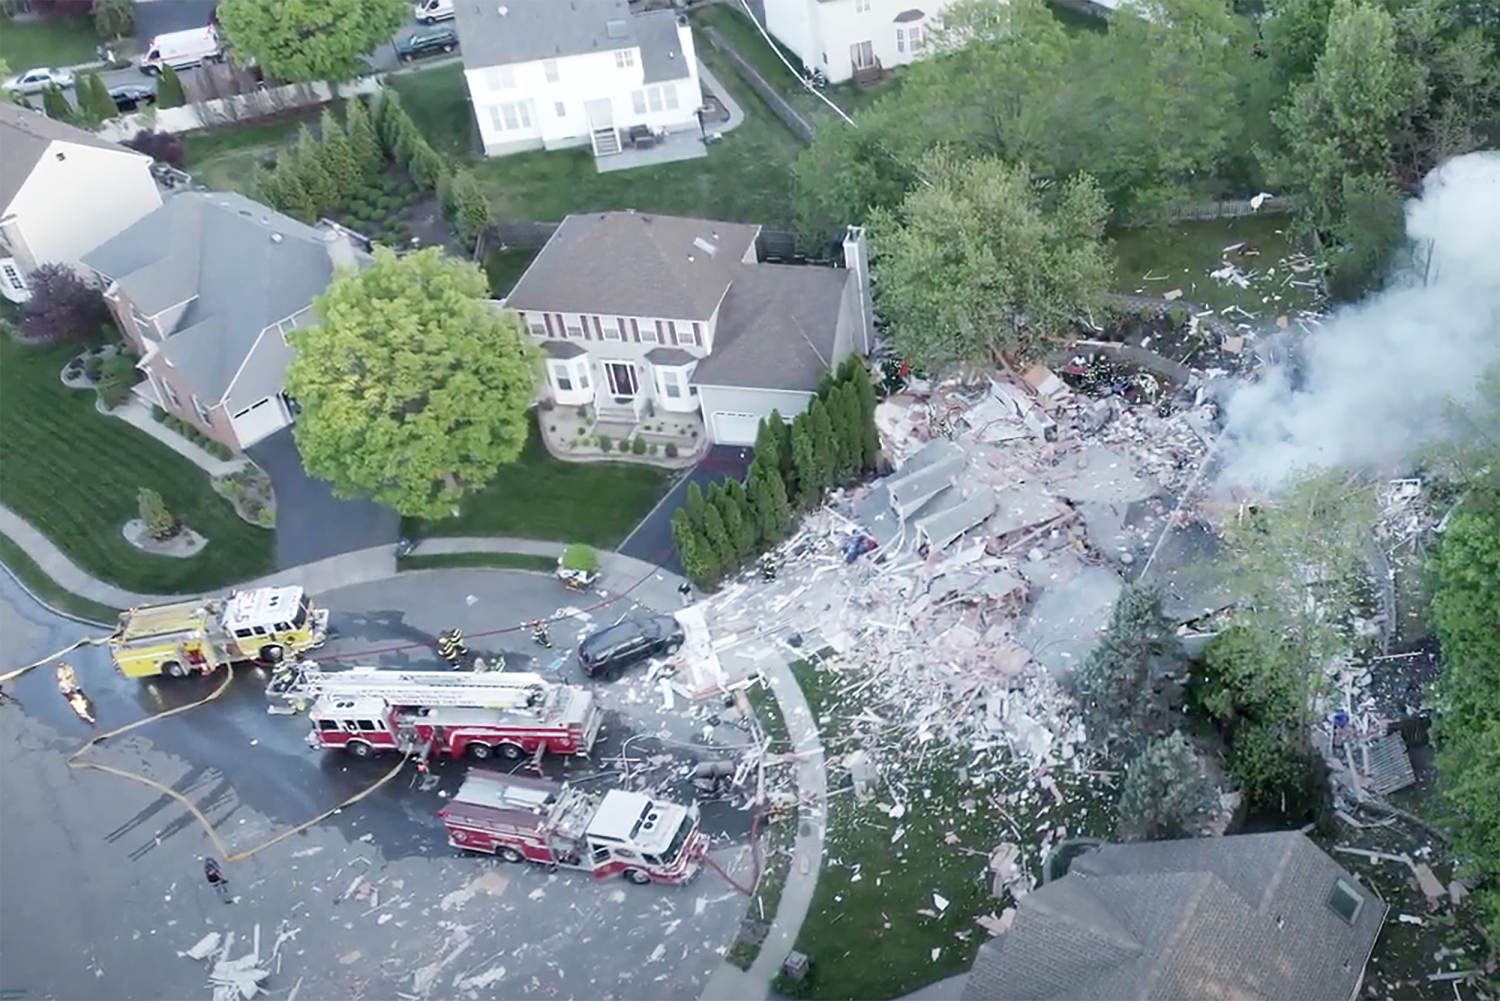 1 dead in home explosion in New Jersey